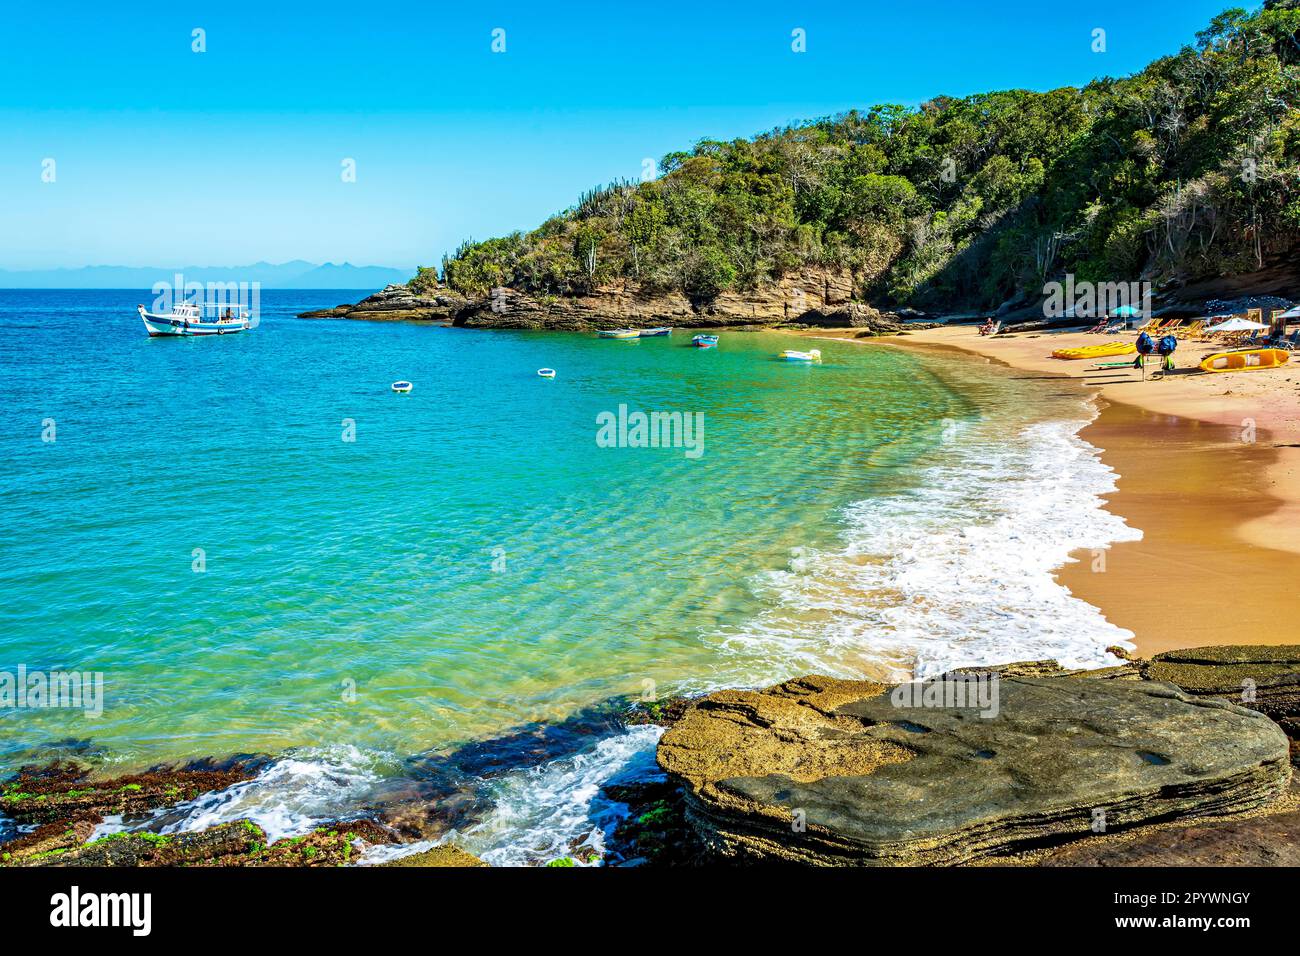 Paradise beach with colorful transparent waters surrounded by stones and vegetation in the city of Buzios, one of the main tourist destinations in Stock Photo